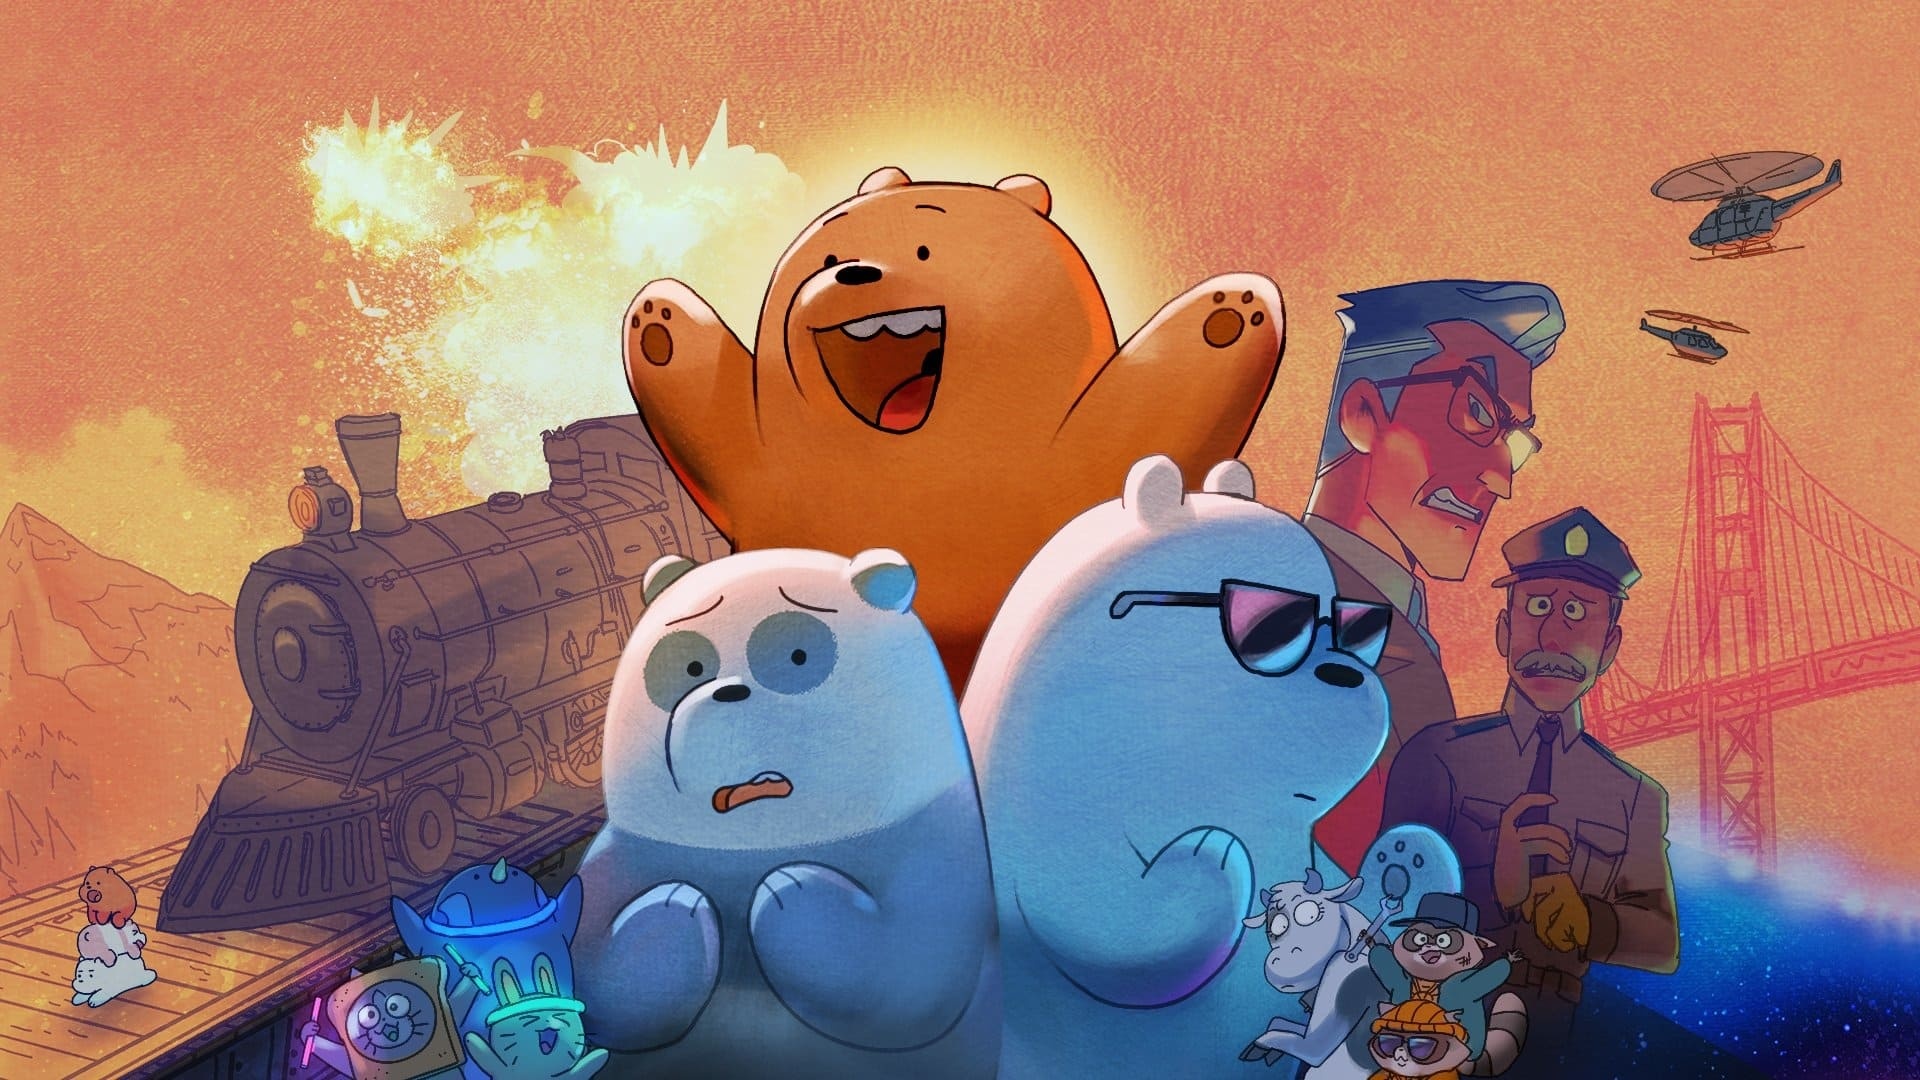 We Bare Bears: The Movie, Animated adventure, Heartwarming journey, Adorable characters, 1920x1080 Full HD Desktop